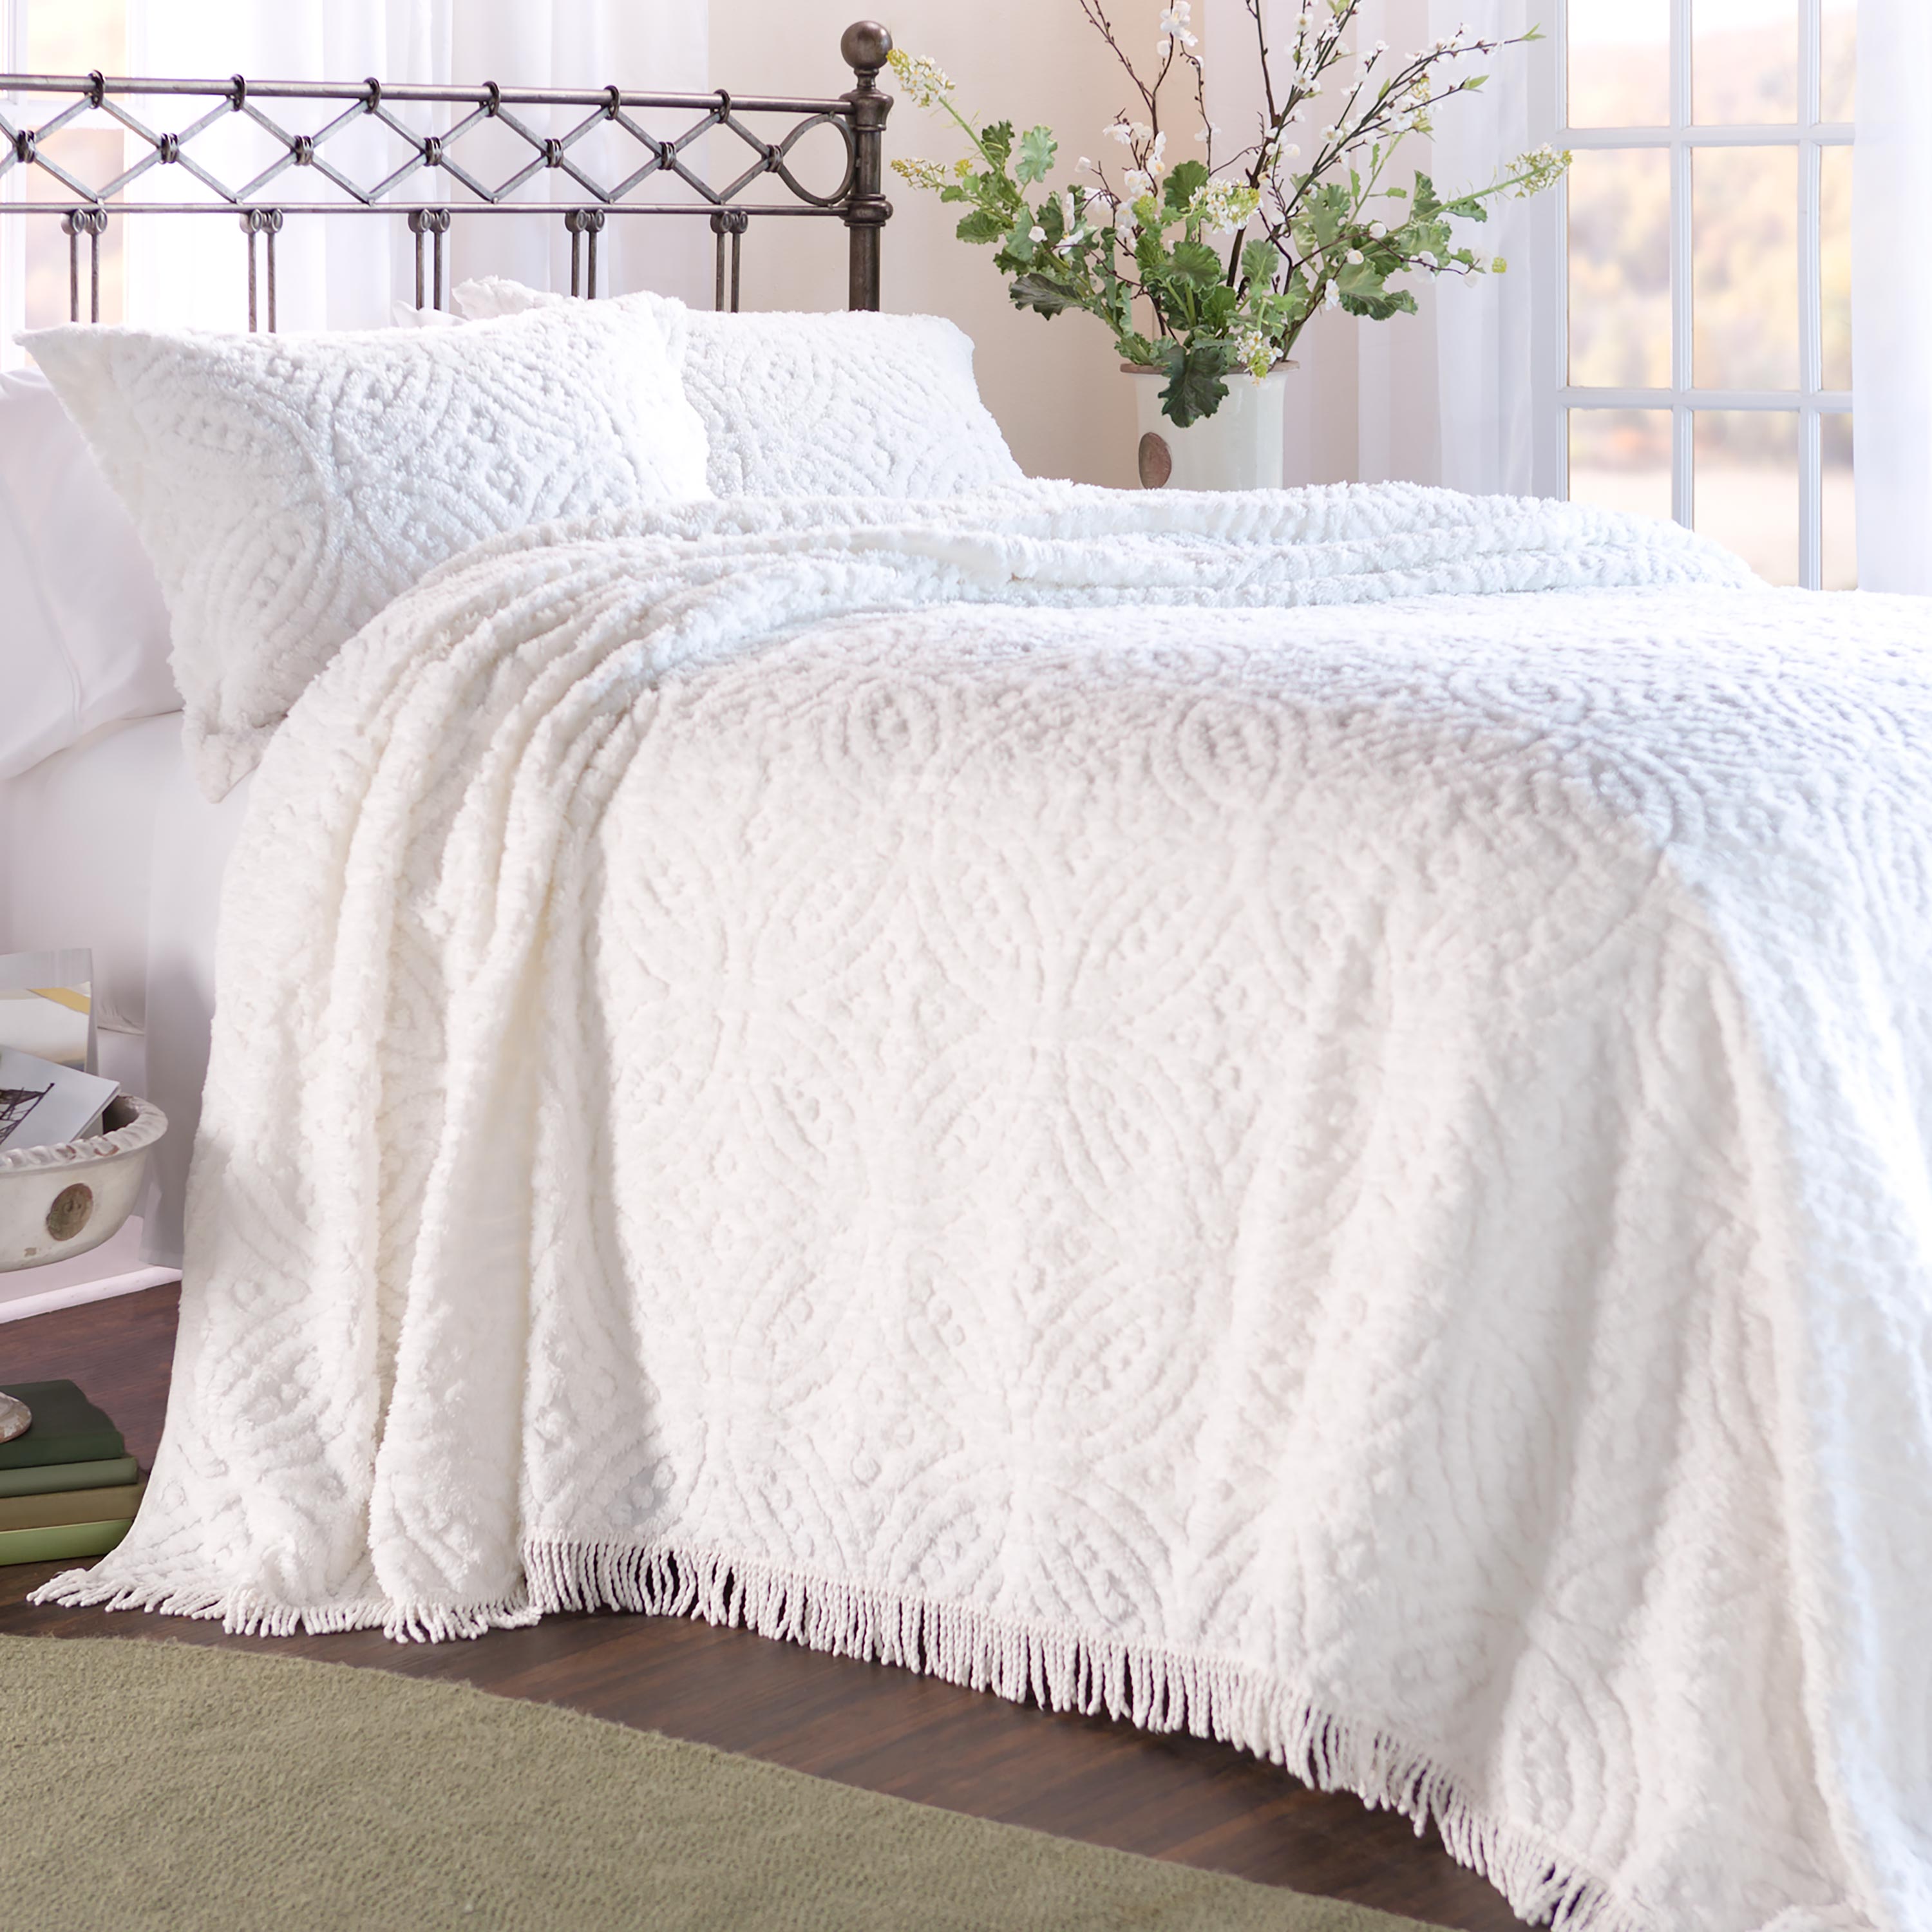 Wedding Ring Tufted Chenille Bedspread and Shams | Plow & Hearth